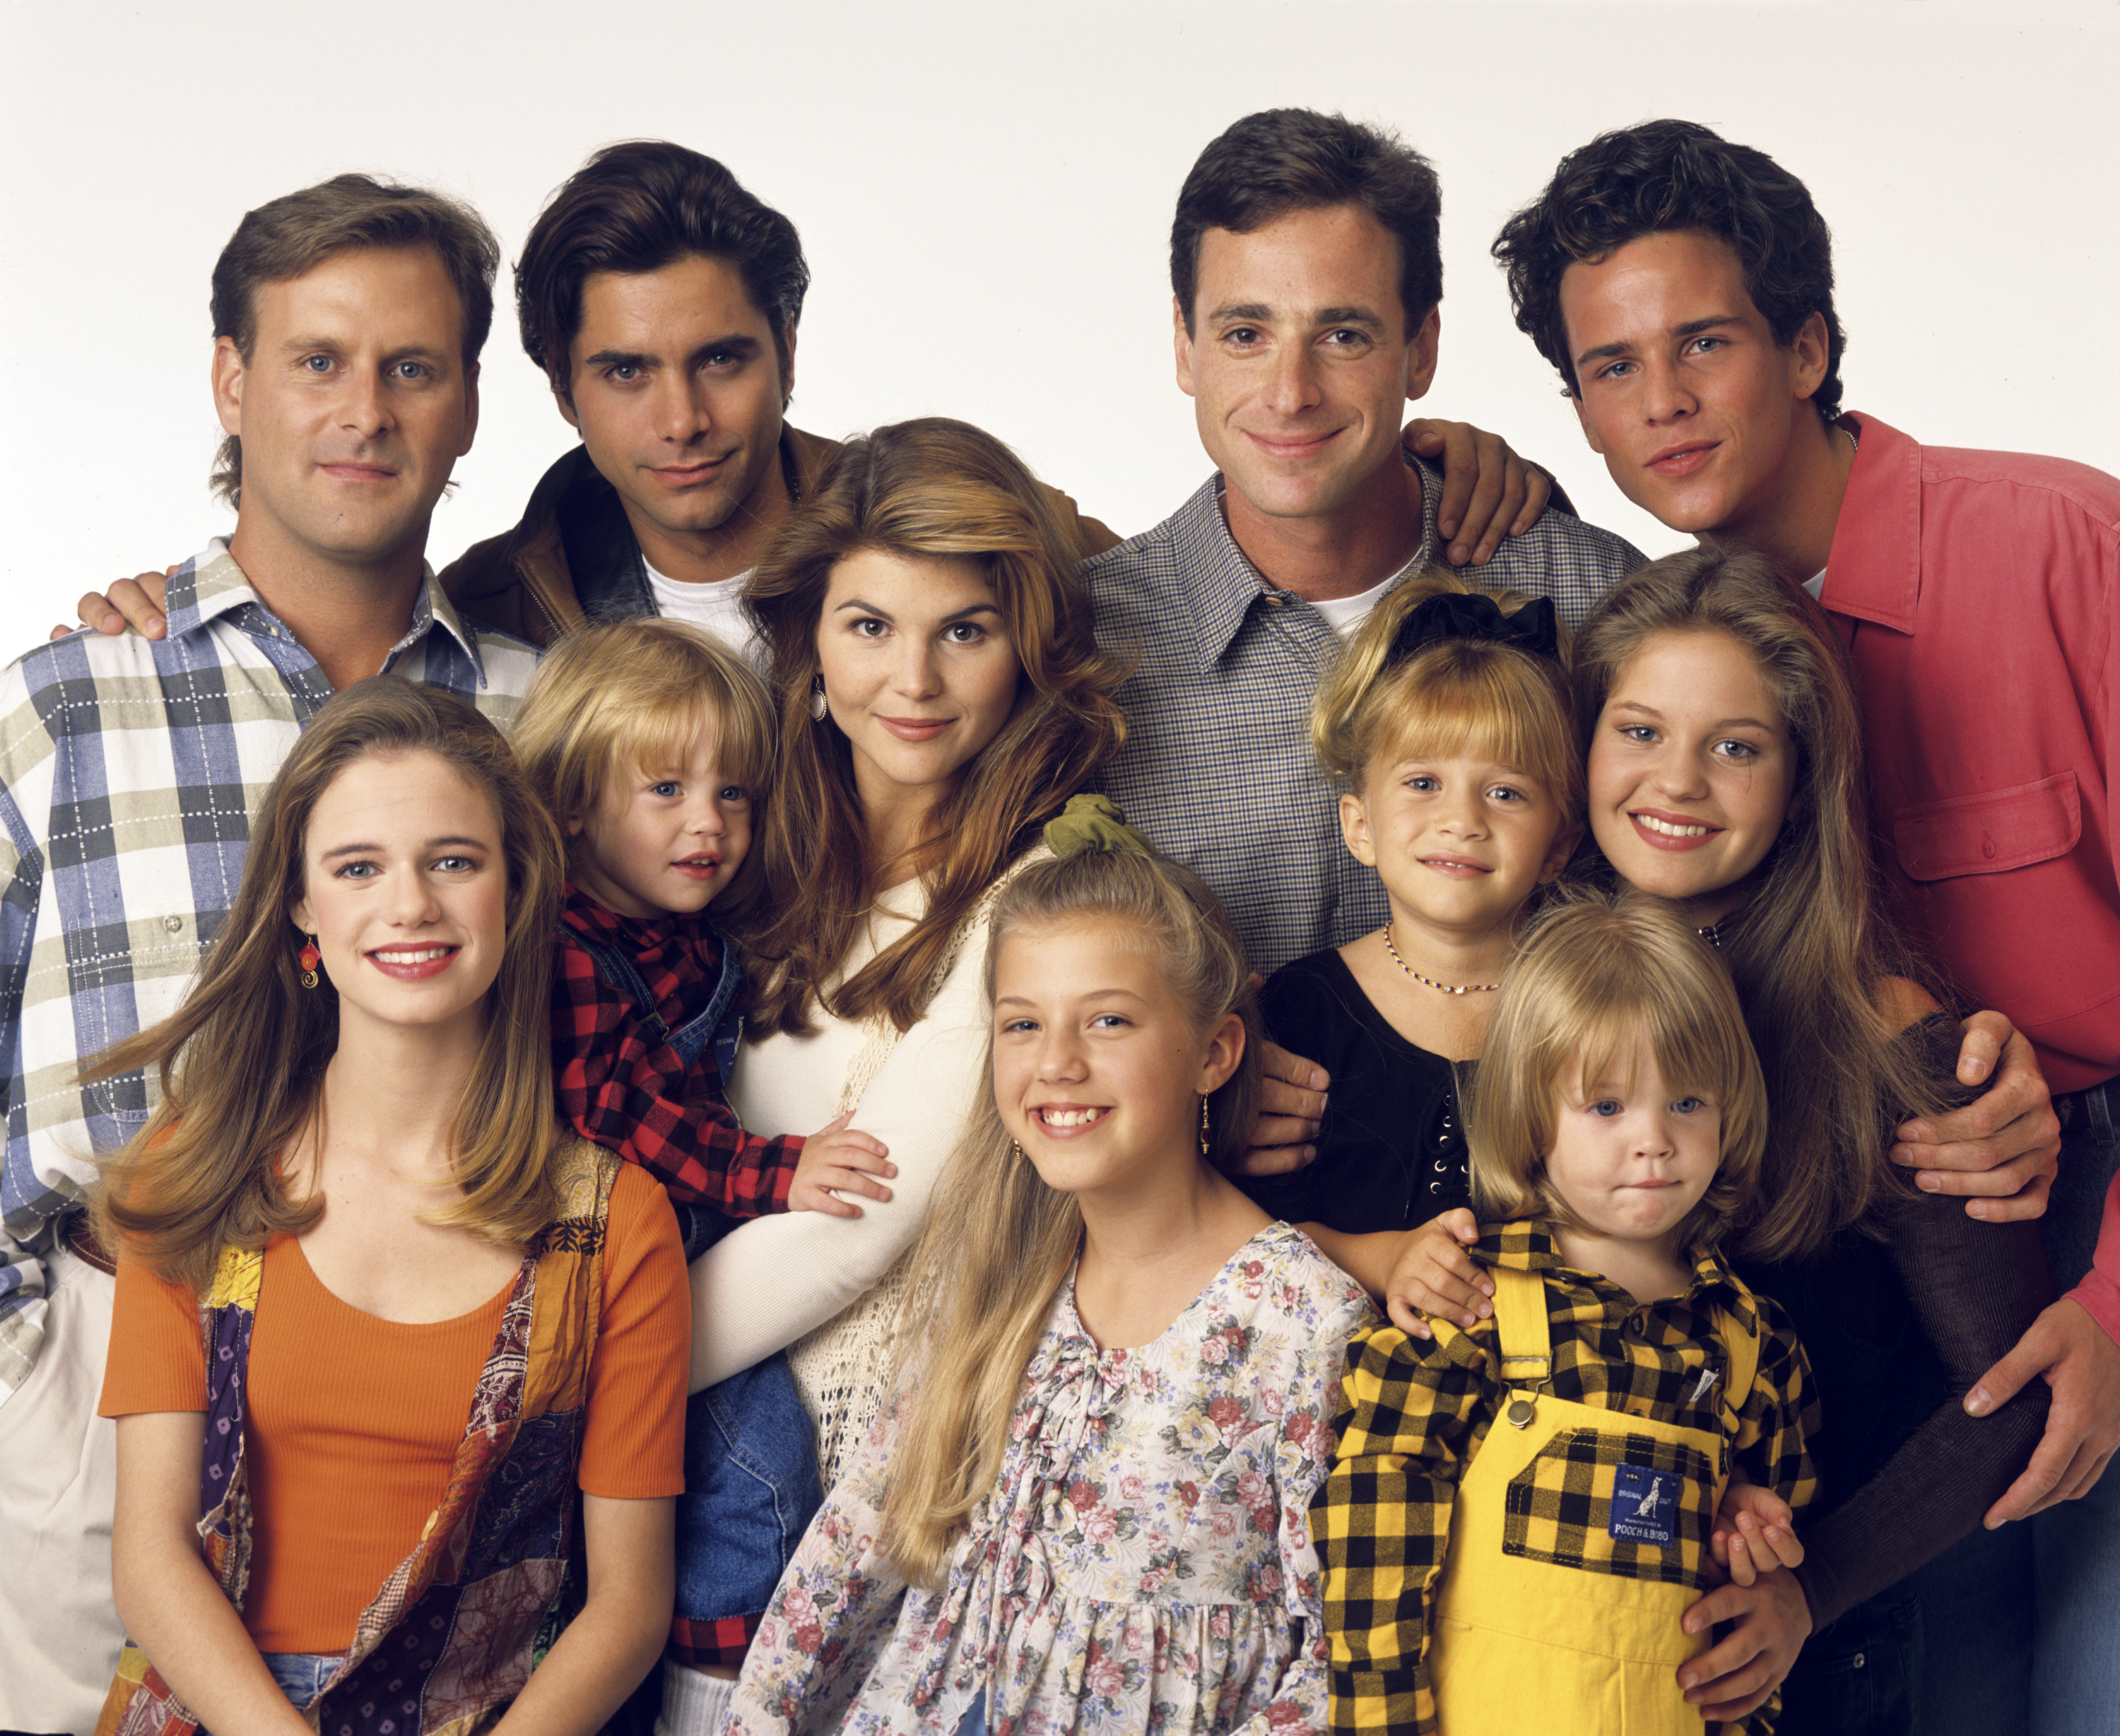 Group photo of the Full House cast: Dave Coulier, John Stamos, Lori Loughlin, Bob Saget, Scott Weinger, Andrea Barber, Jodie Sweetin, Mary-Kate and Ashley Olsen, Candace Cameron Bure